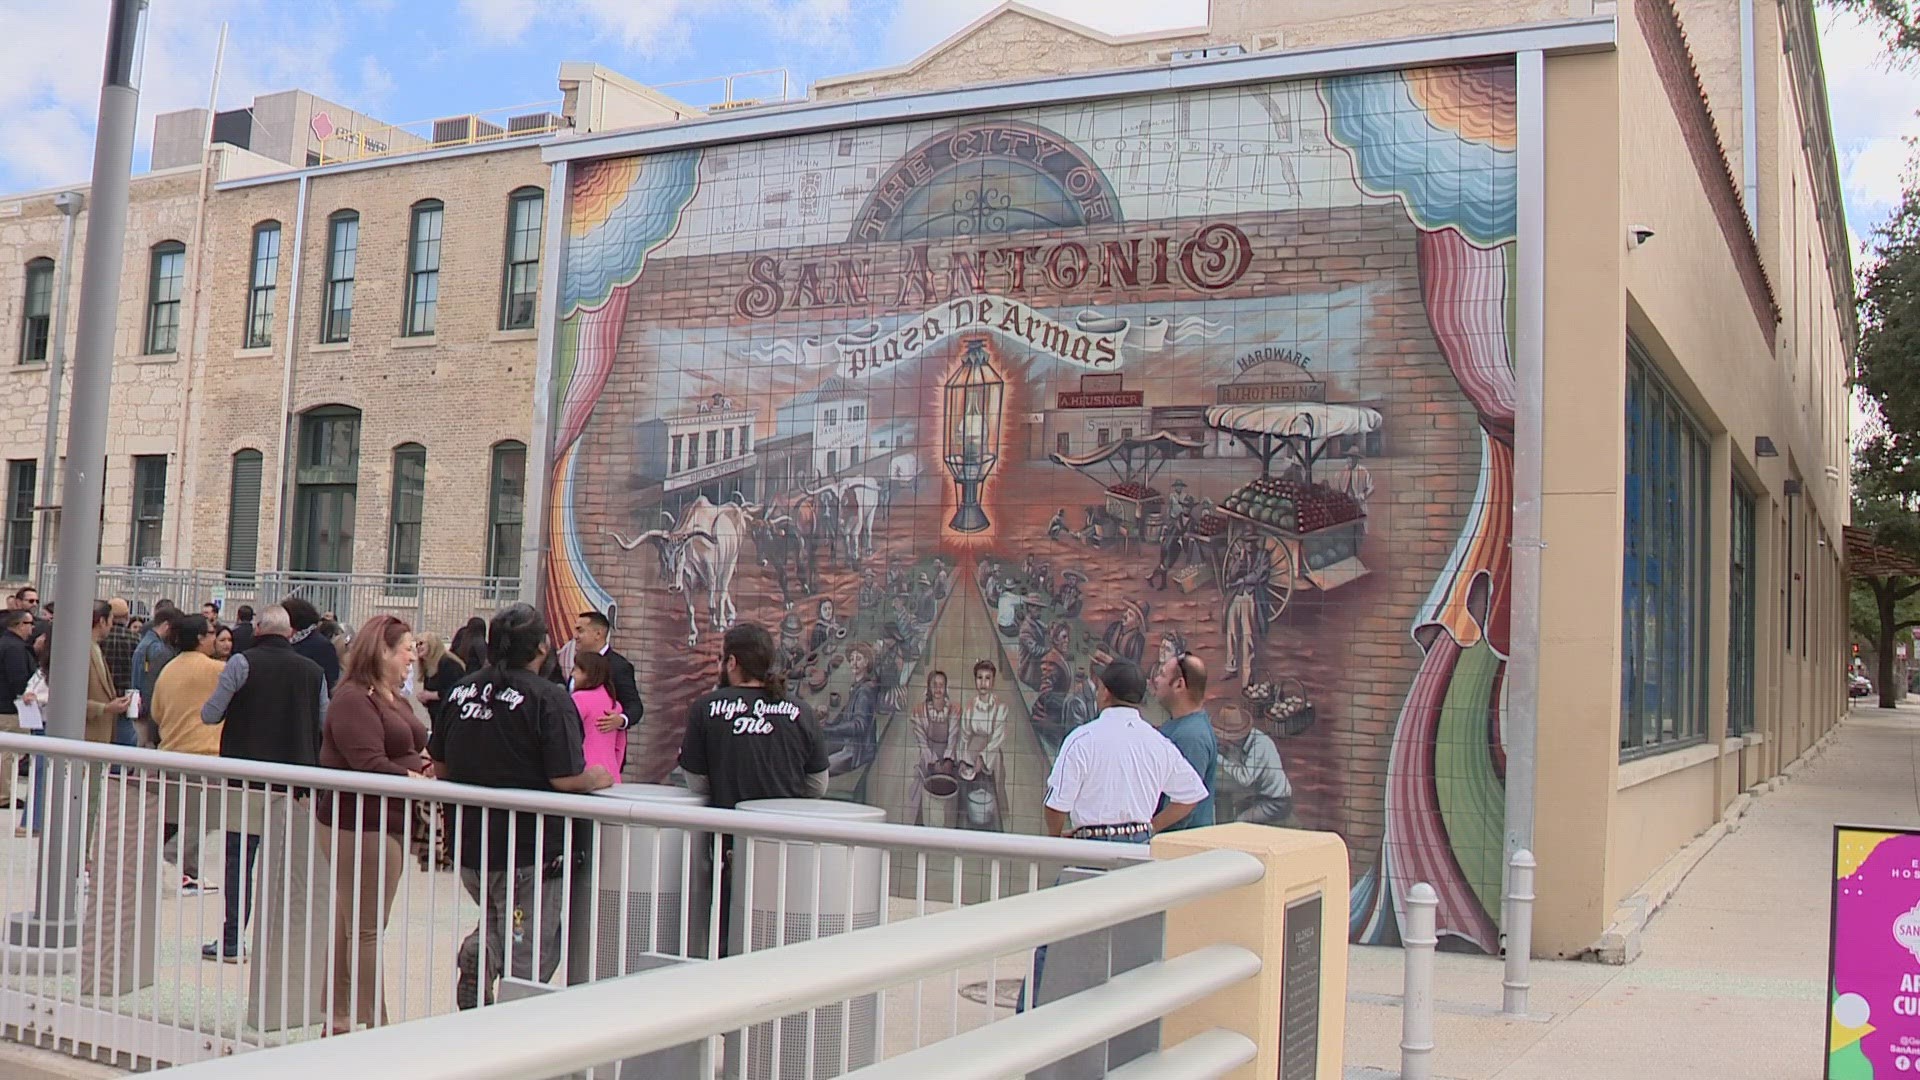 Ribbon cutting for new large scale tile mural that tells the story of historic plaza de armas